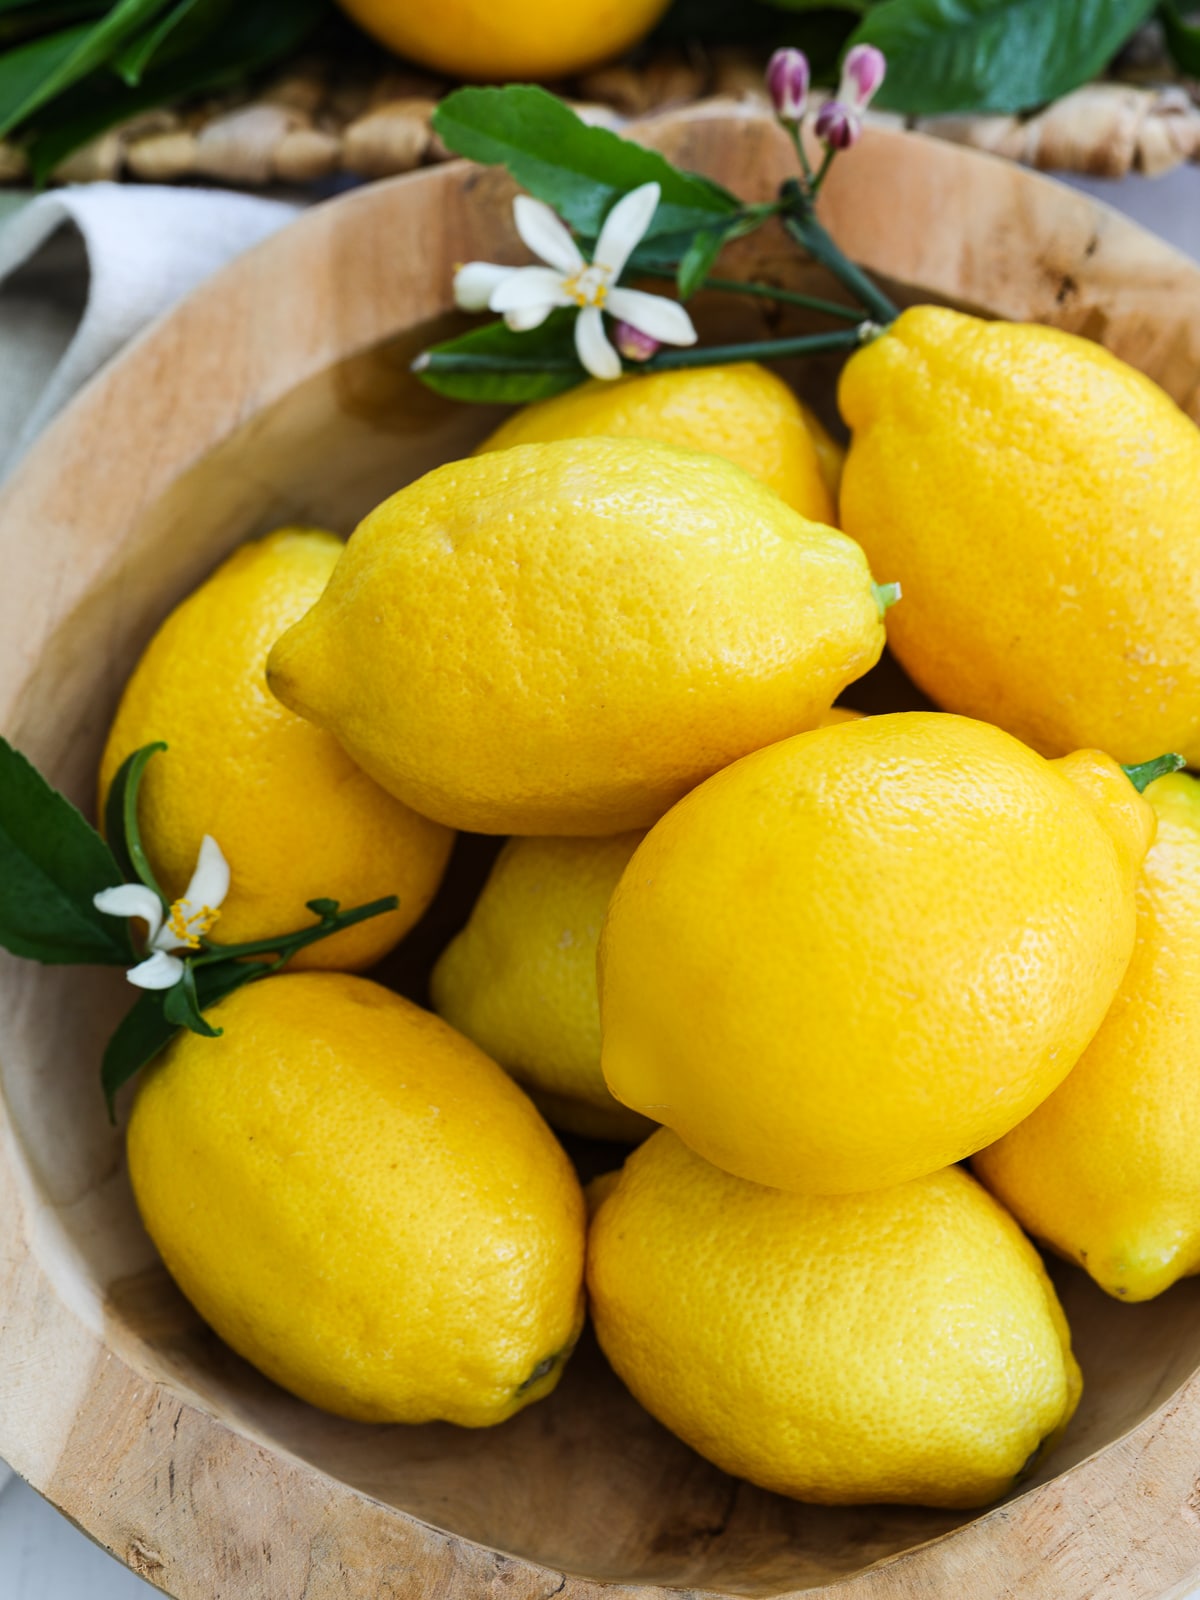 A wooden bowl filled with lemons ready to use in recipes.